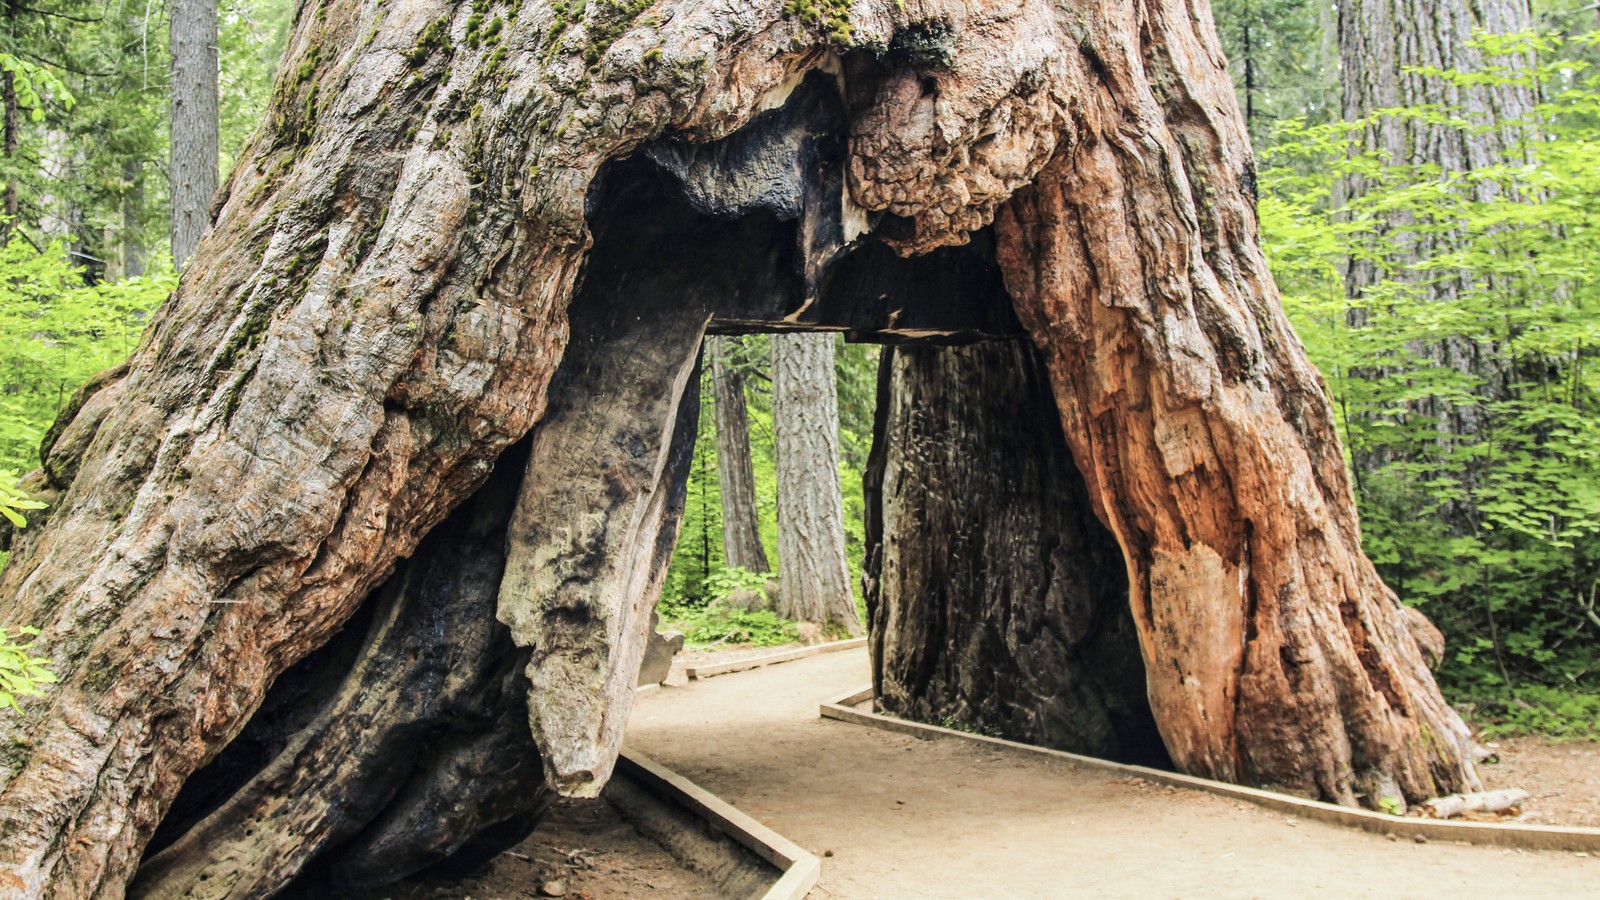 Drive-Through Redwoods Are Monuments to Violent - The Atlantic